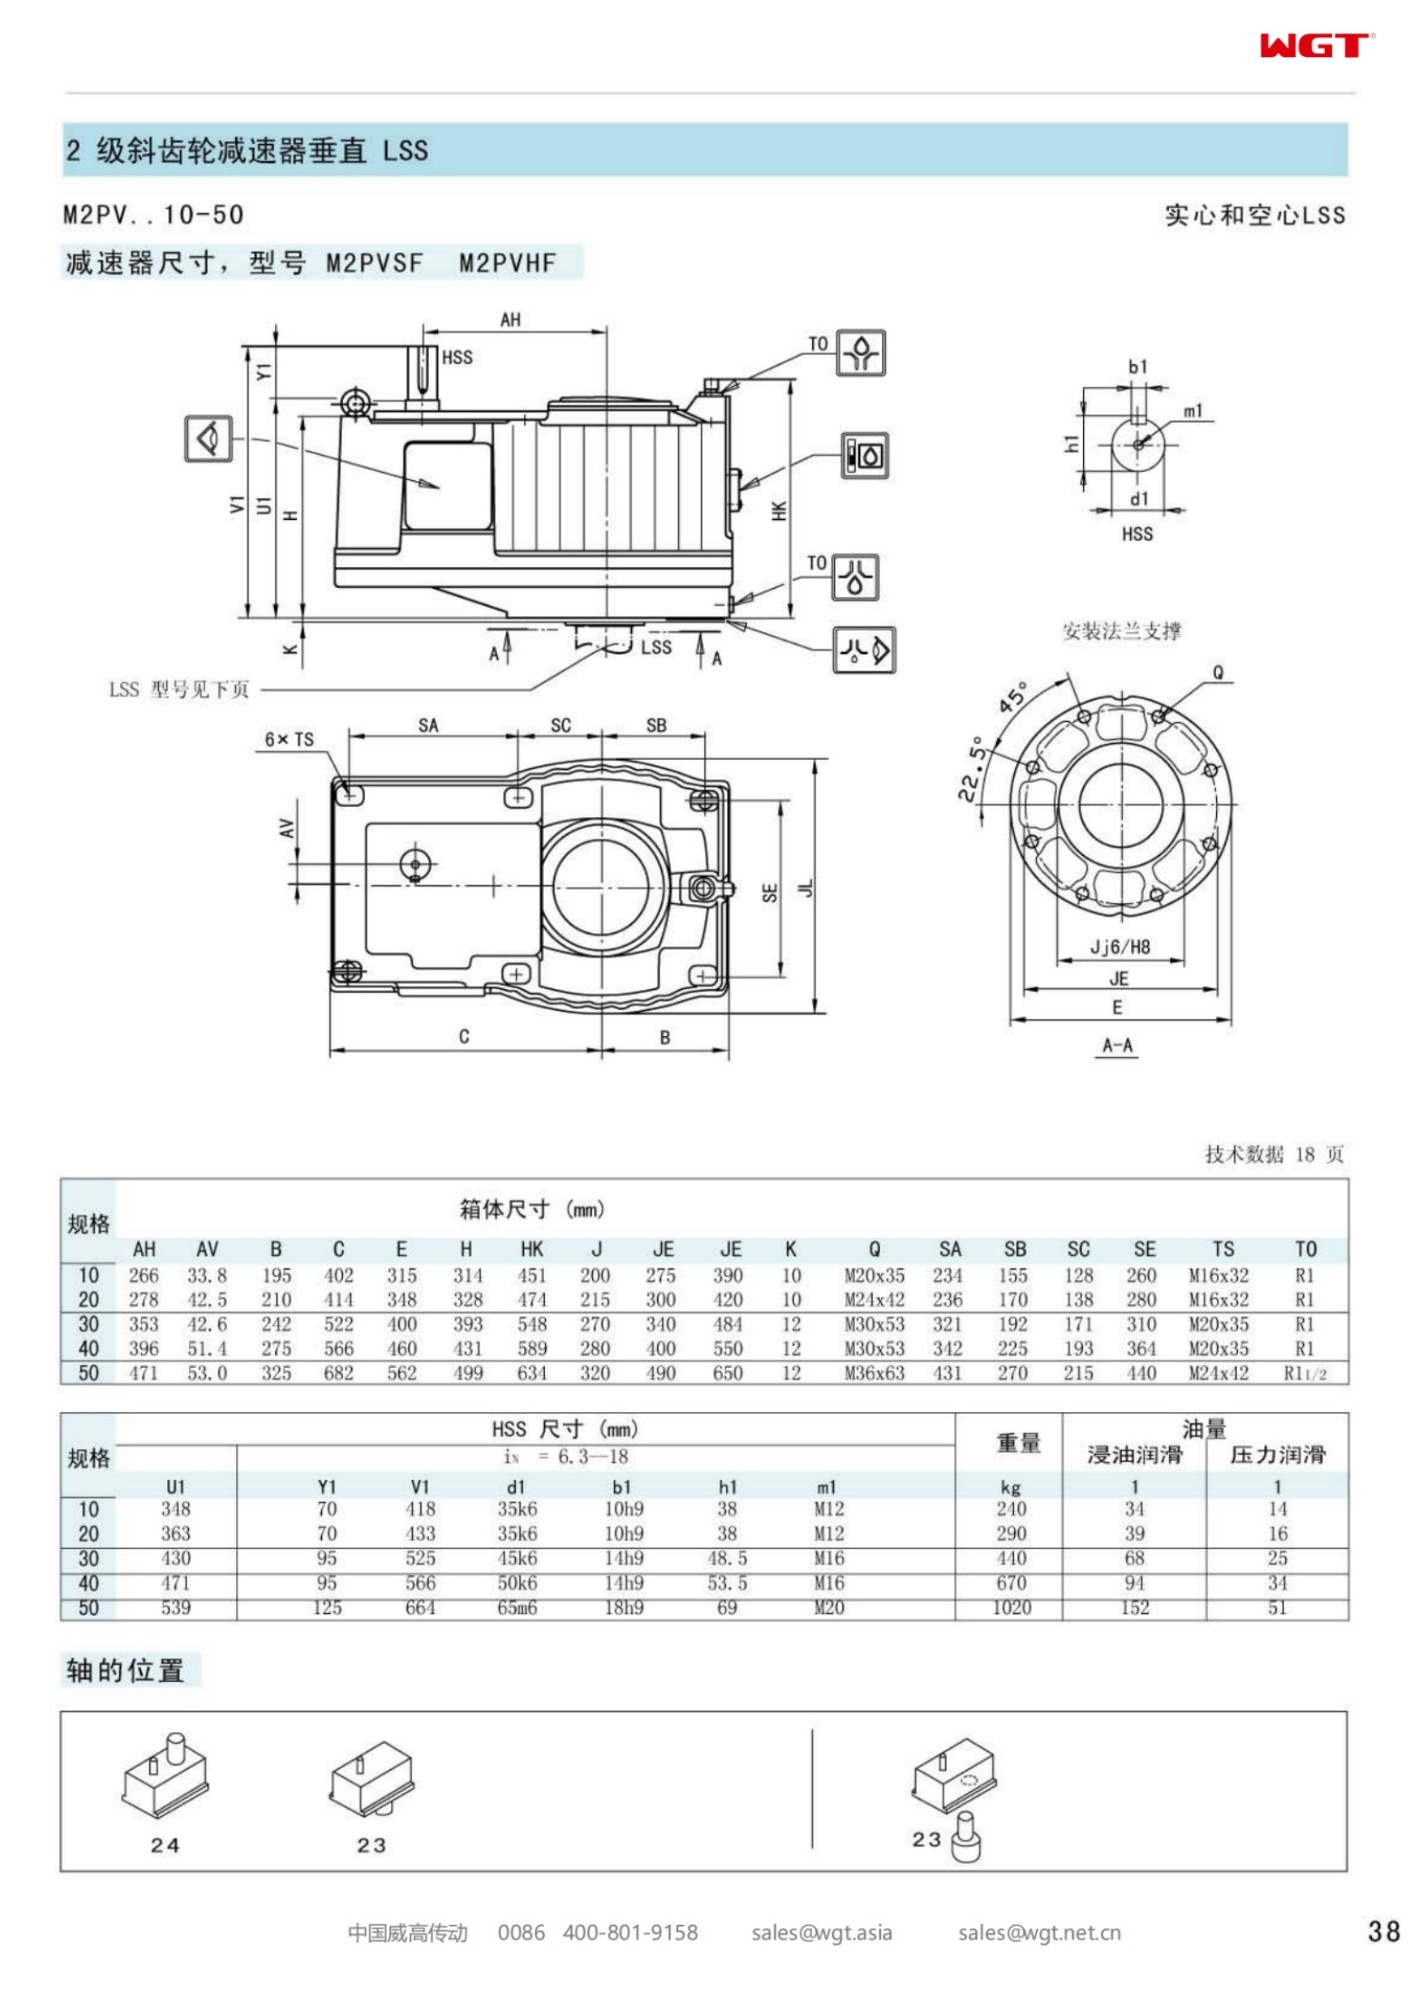 M2PVSF40 Replace_SEW_M_Series Gearbox  